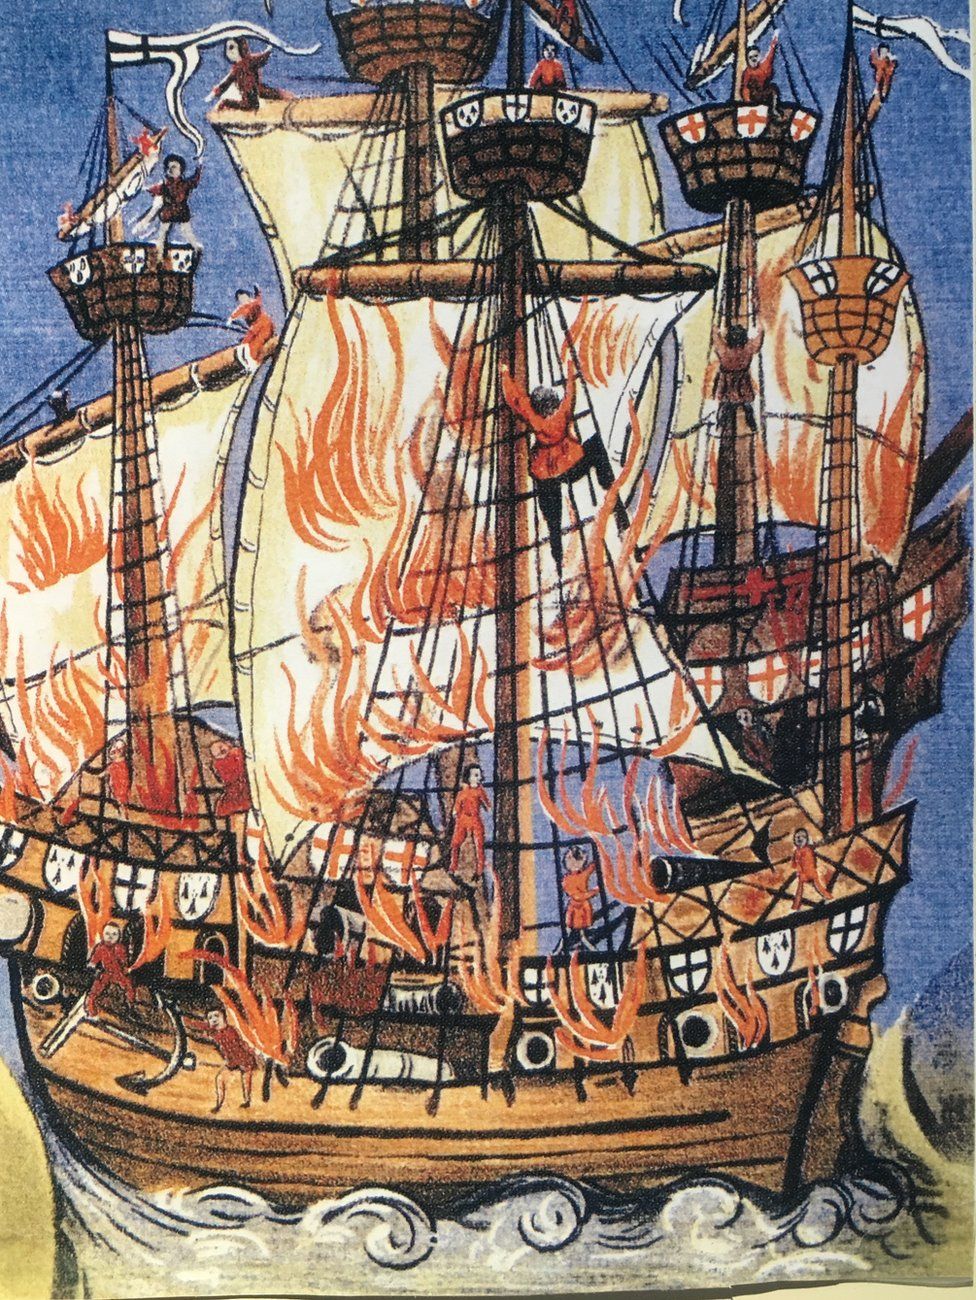 An illustration in an old-fashioned style shows a wooden tall ship ablaze as some figures work upon its decks on its ropes